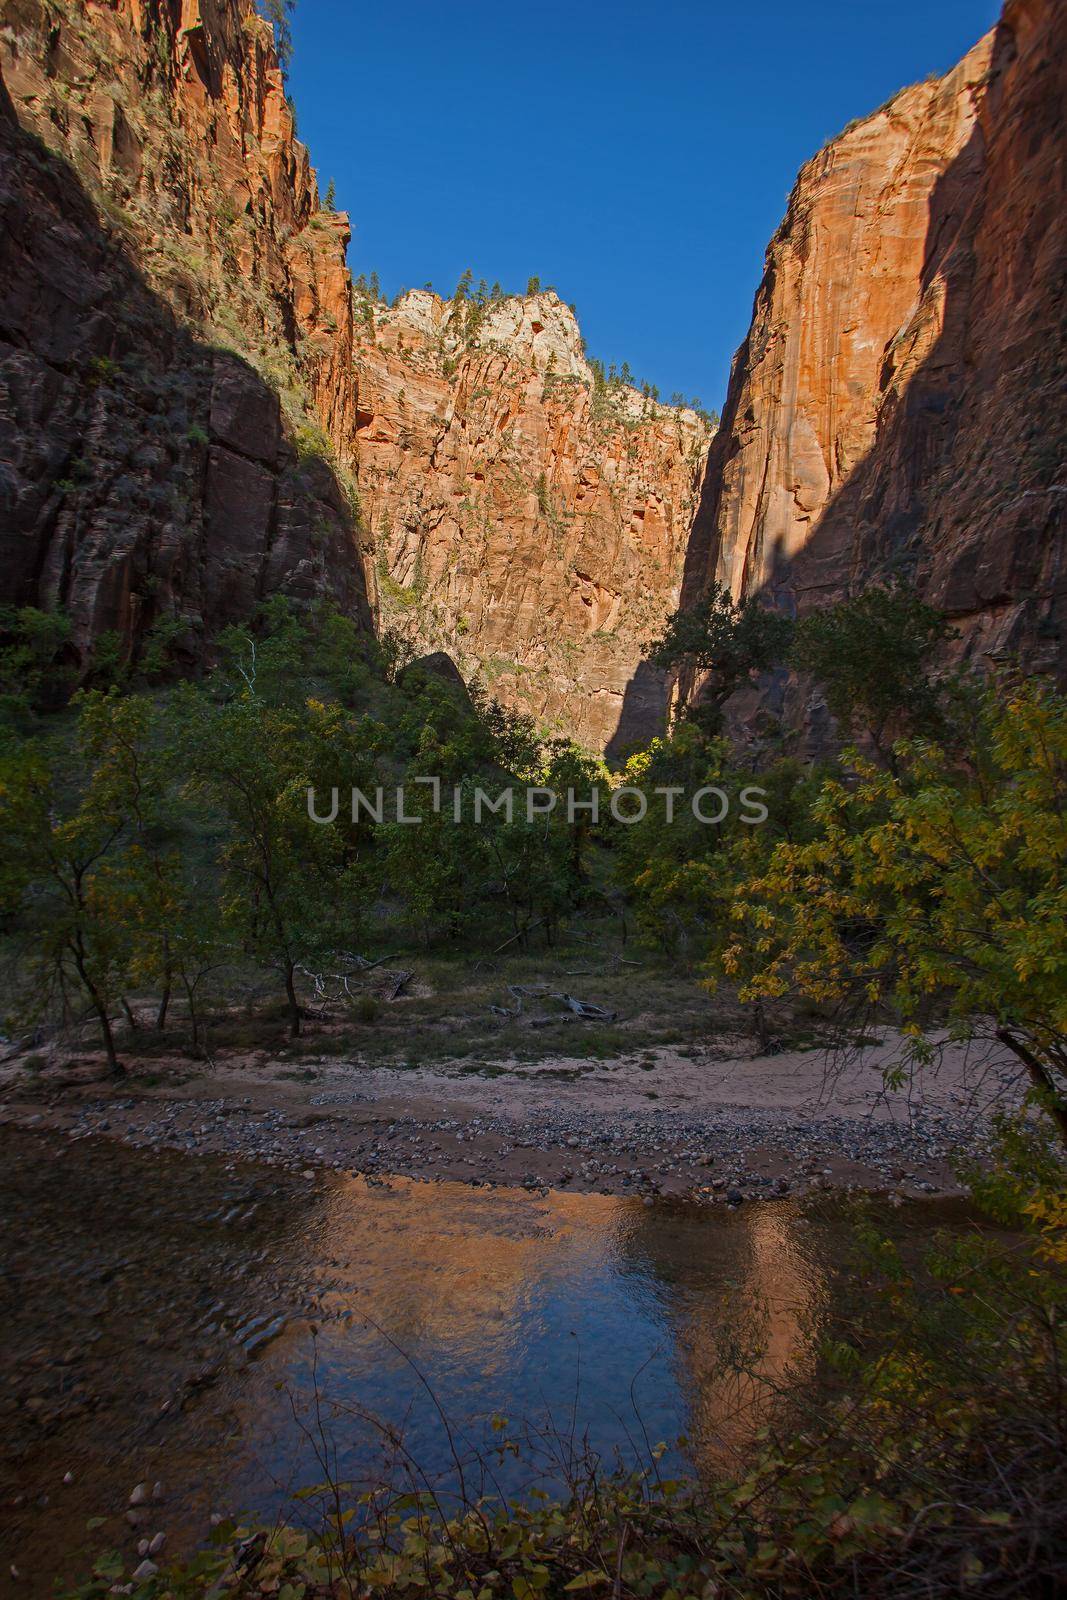 Virgin River Zion National Park 2590 by kobus_peche